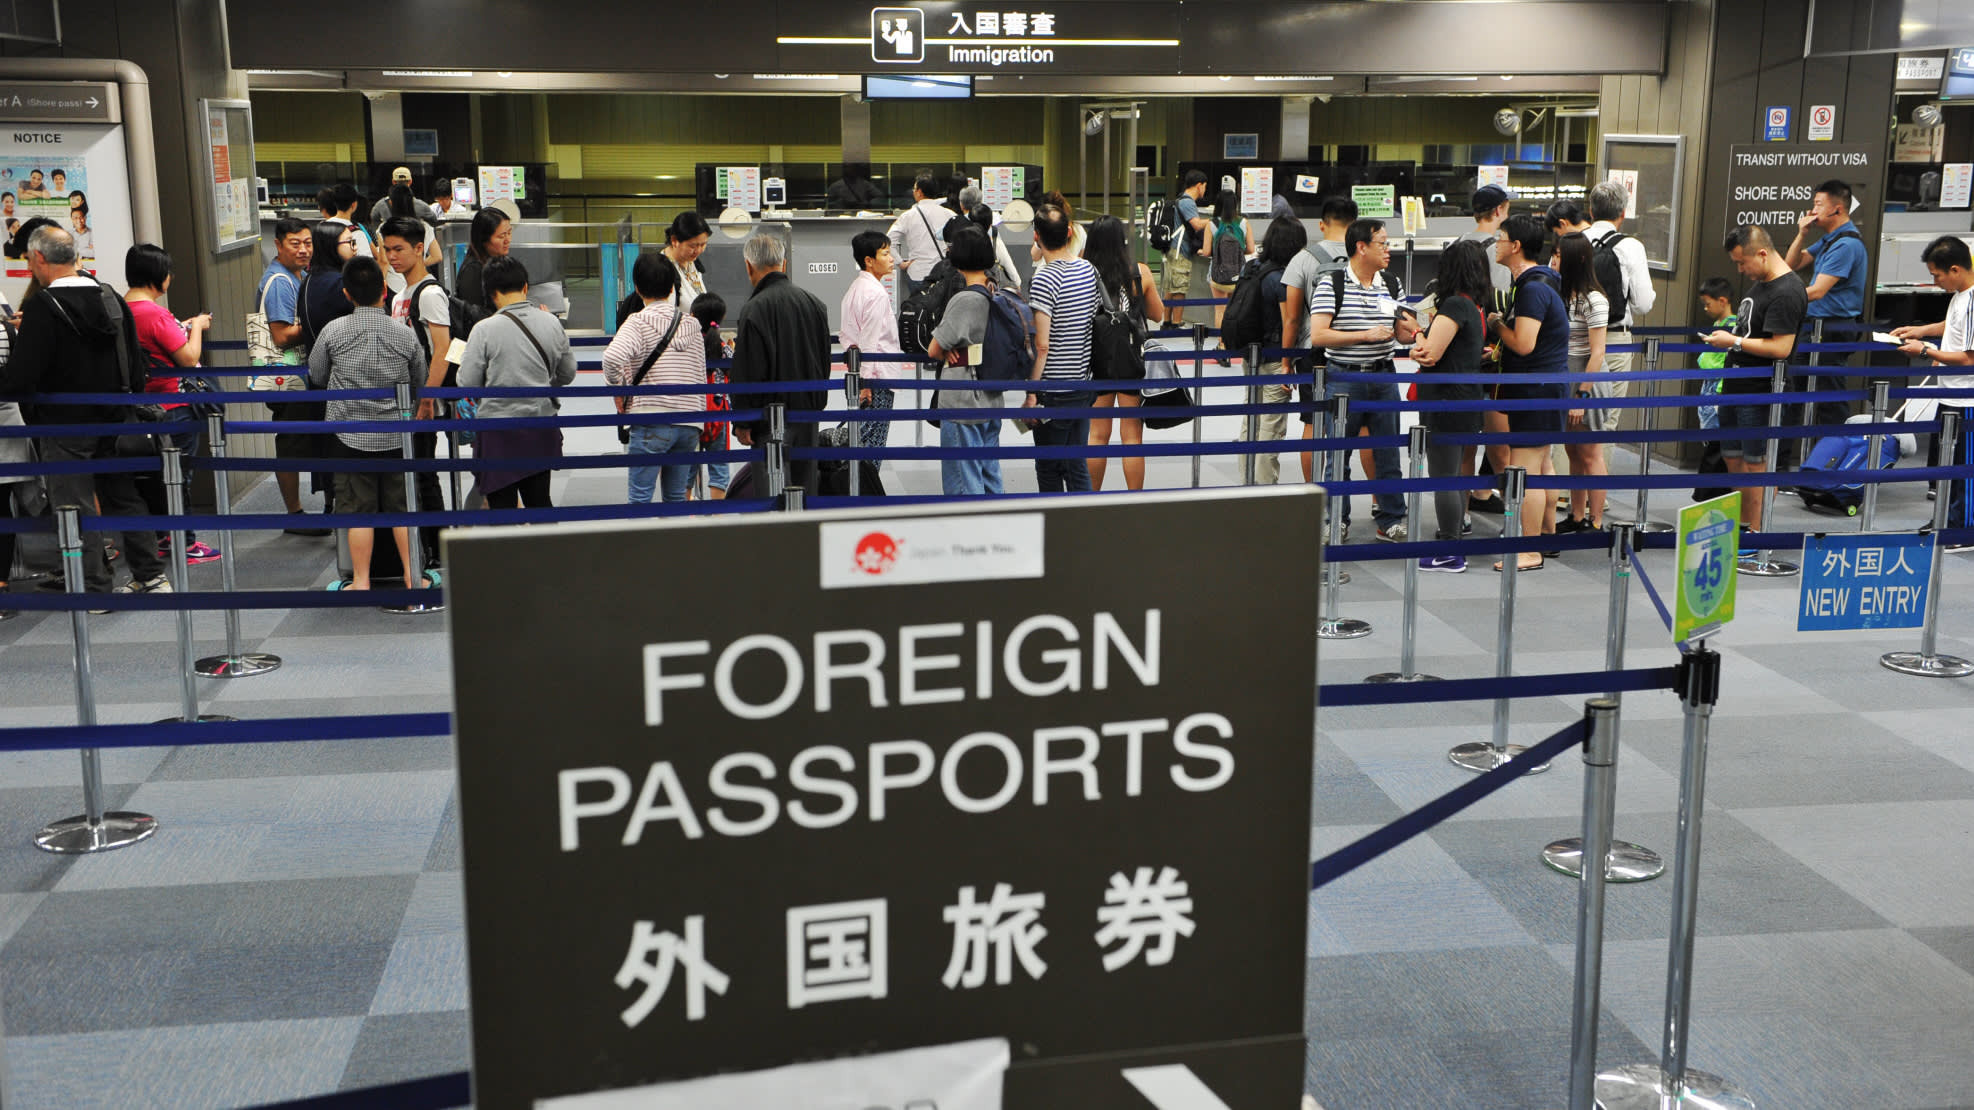 Japan plan to launch electronic visa system in time for Tokyo 2020 